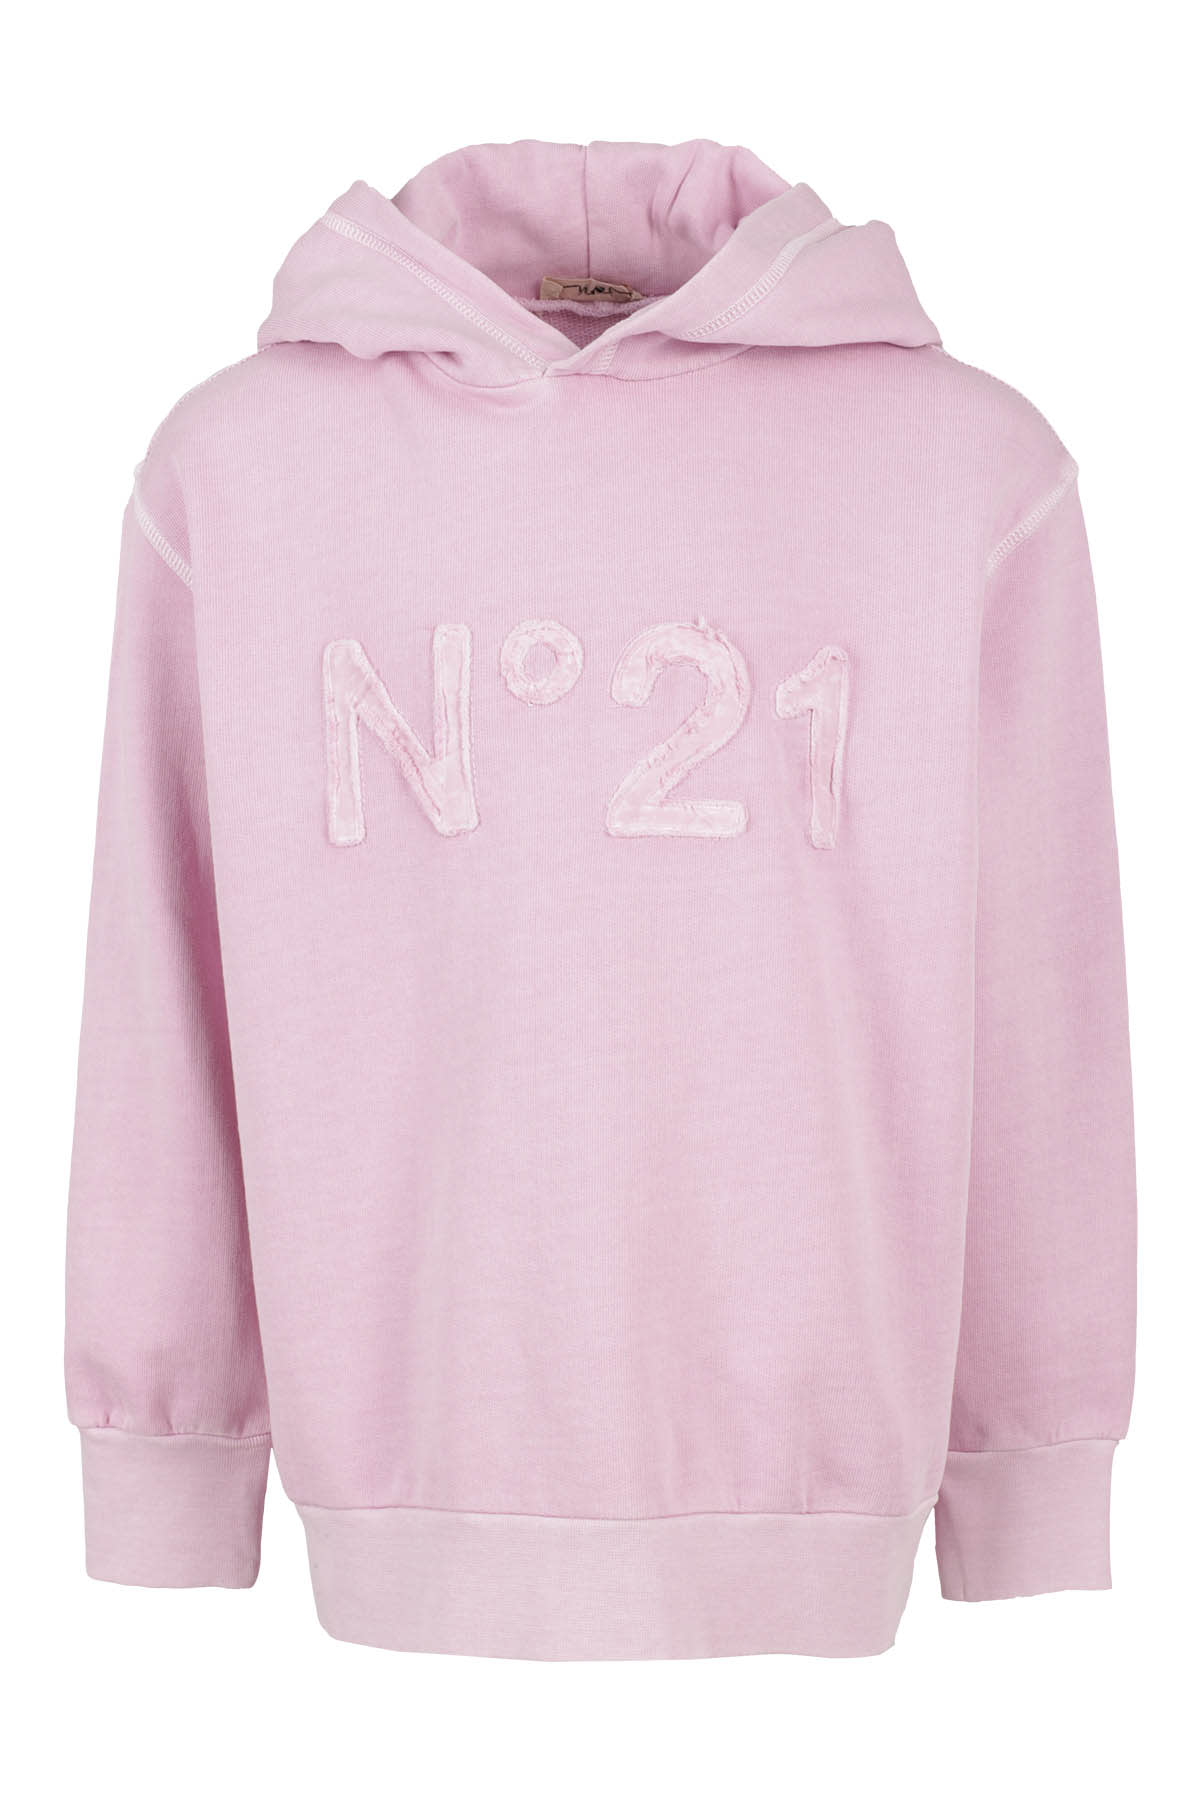 N°21 Kids' Over In Lilac Pink